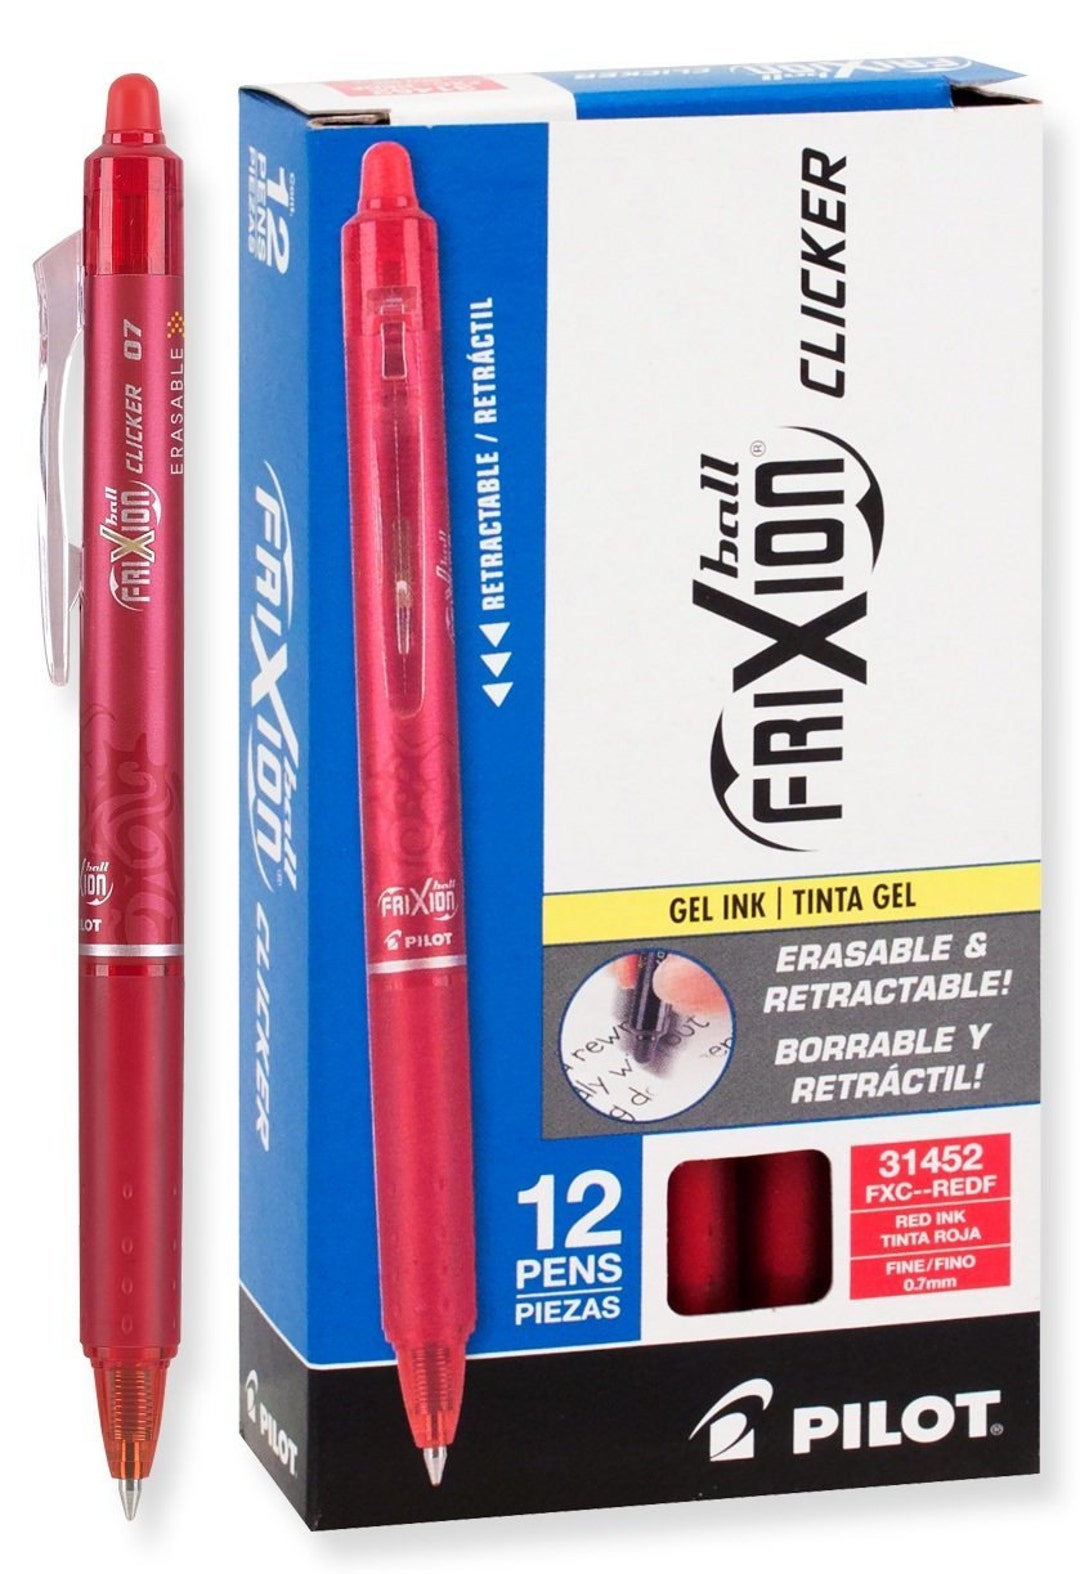 Pilot Frixion Ball 0.7 Erasable Gel Ink Pens, Blue, 12 Pack Coloring Bible  Study Journaling Planer Markers Highlighters 